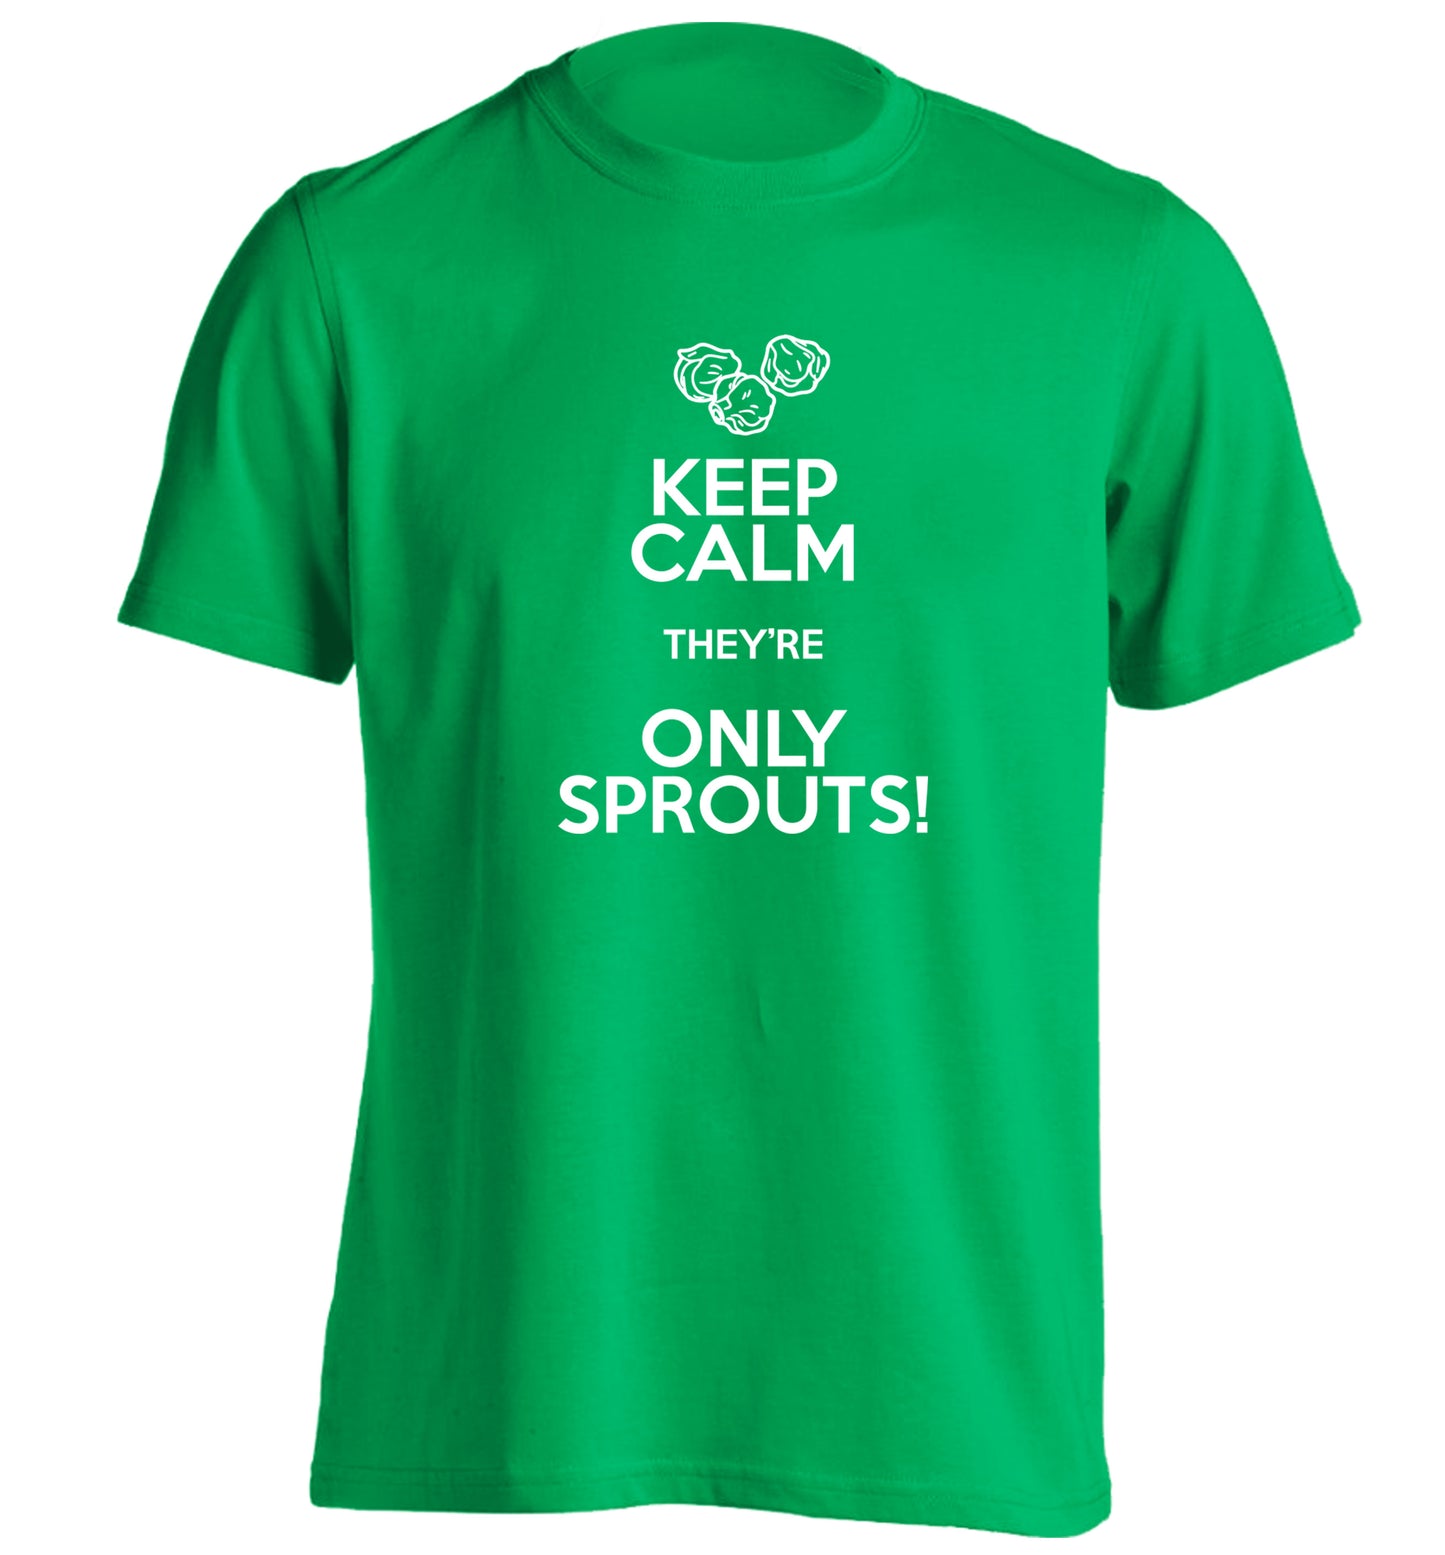 Keep calm they're only sprouts adults unisex green Tshirt 2XL